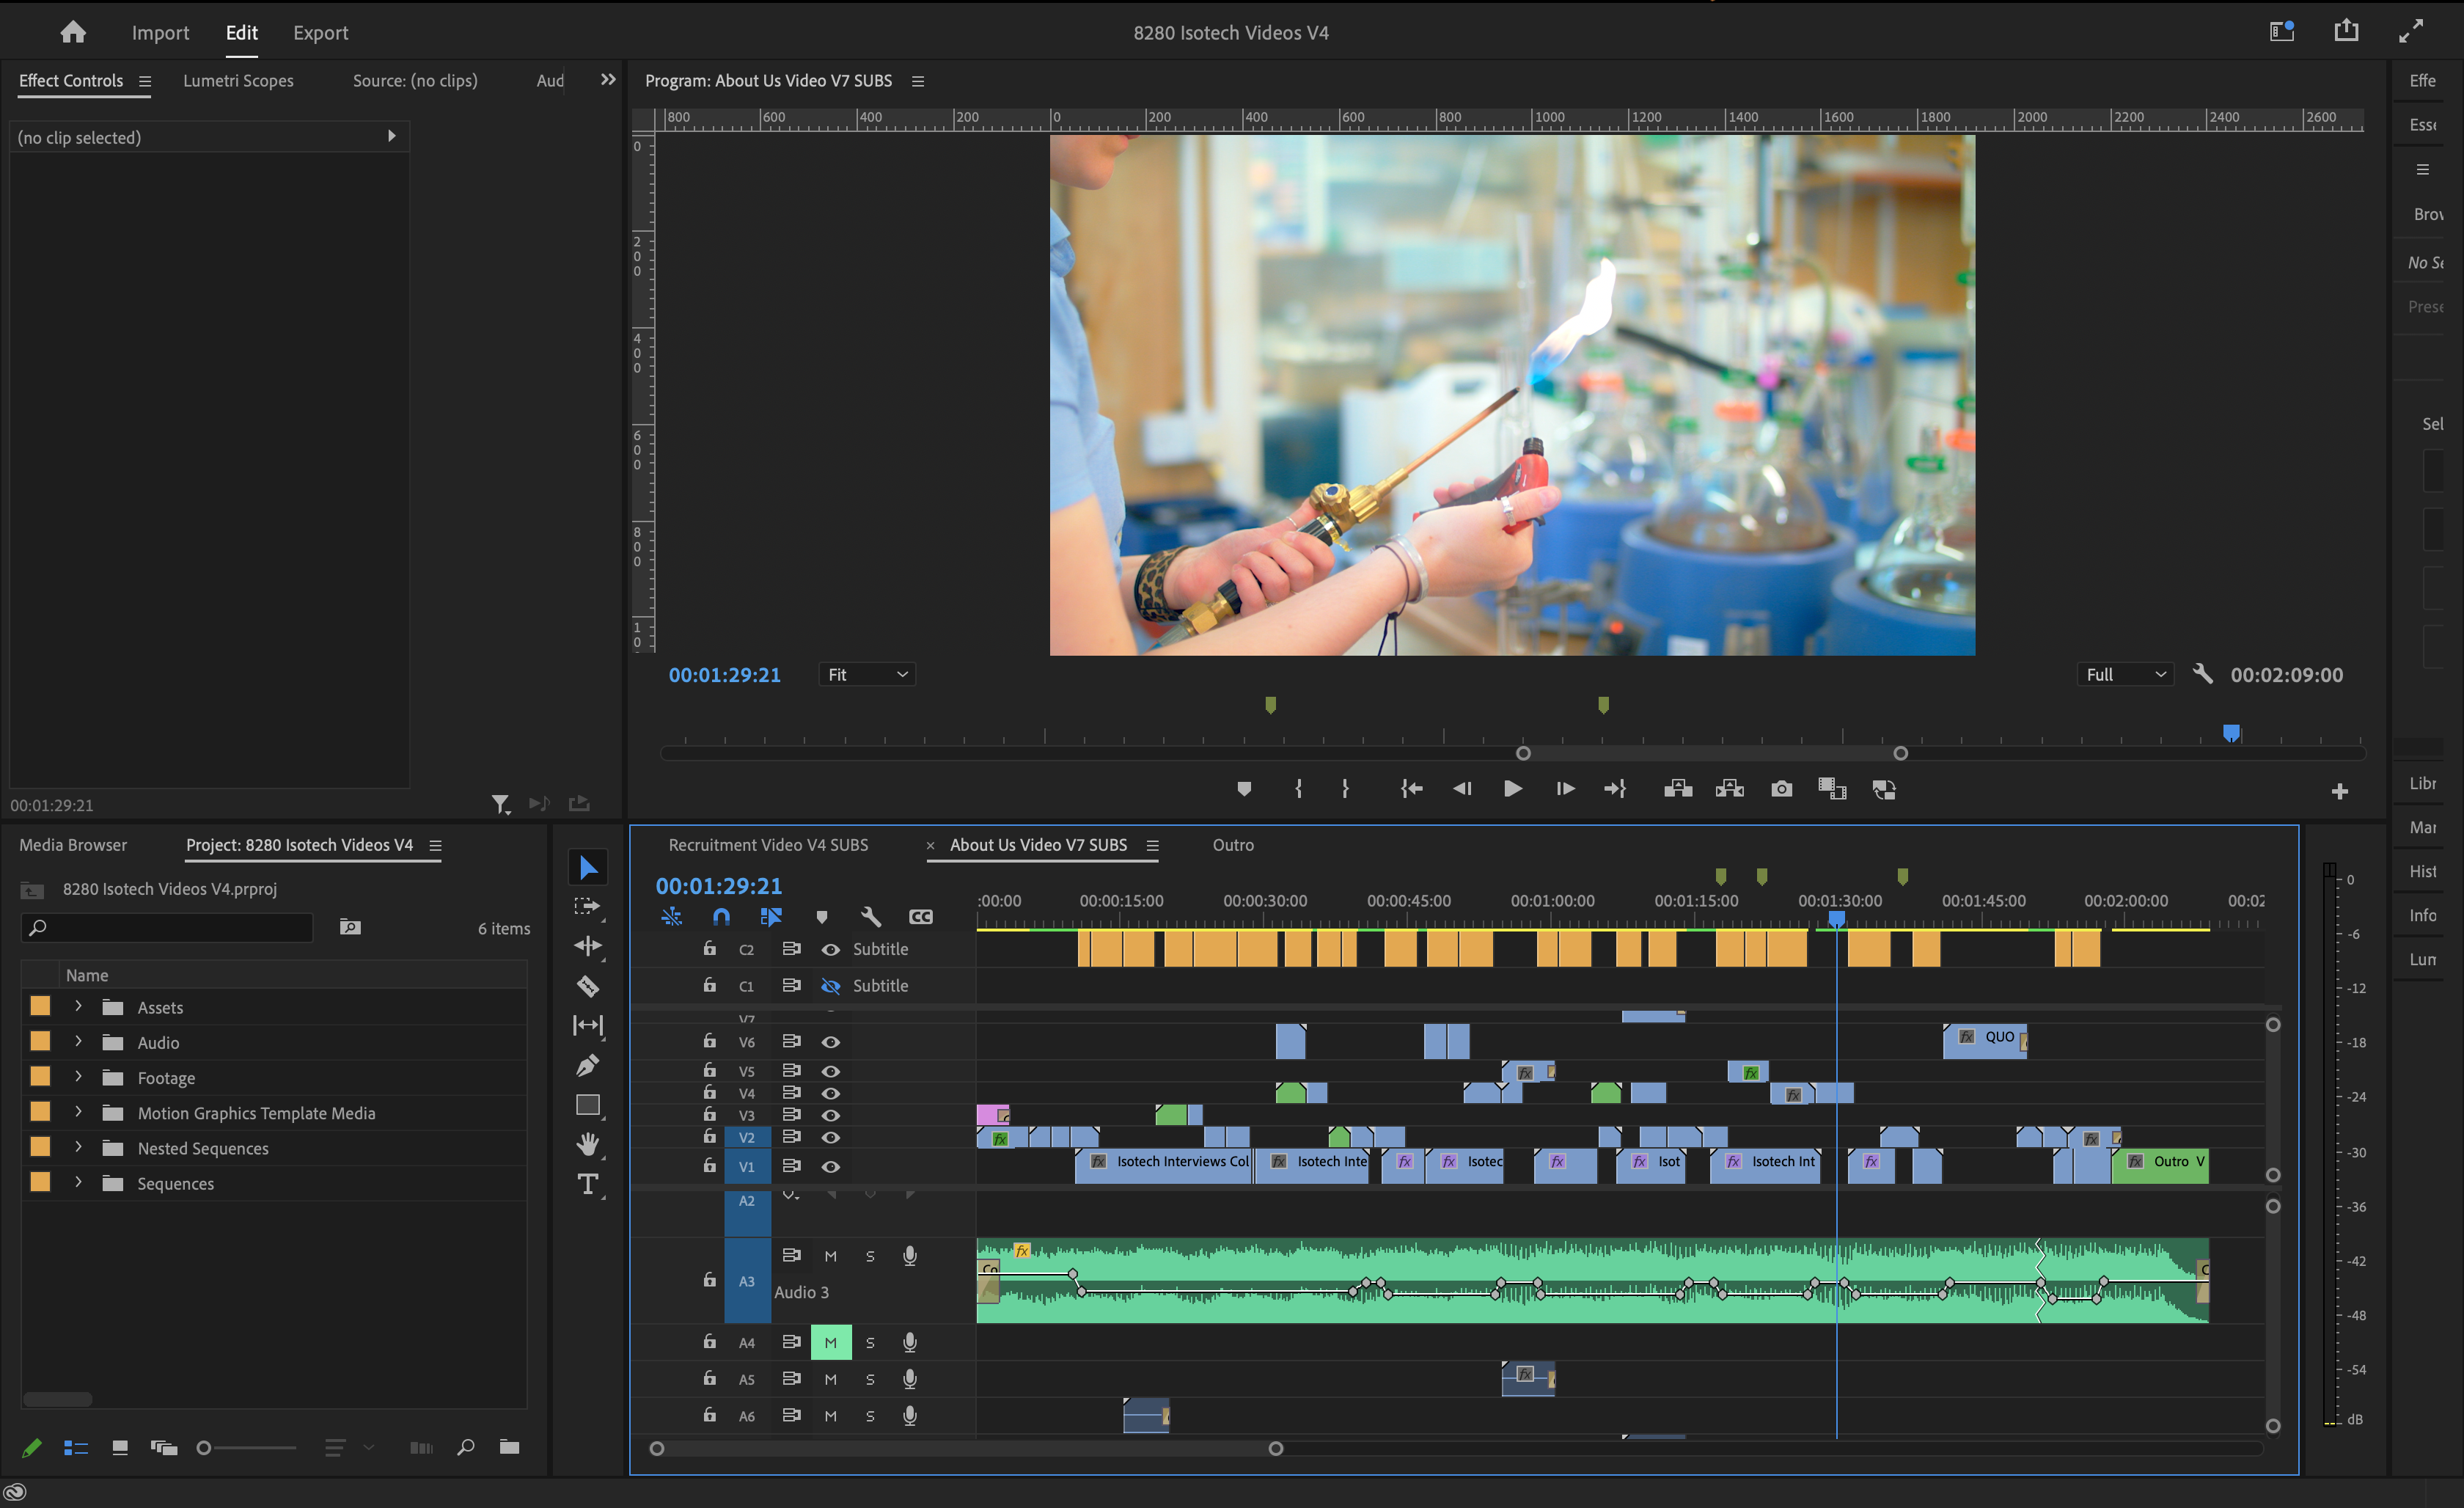 video product editing of Isotech employee